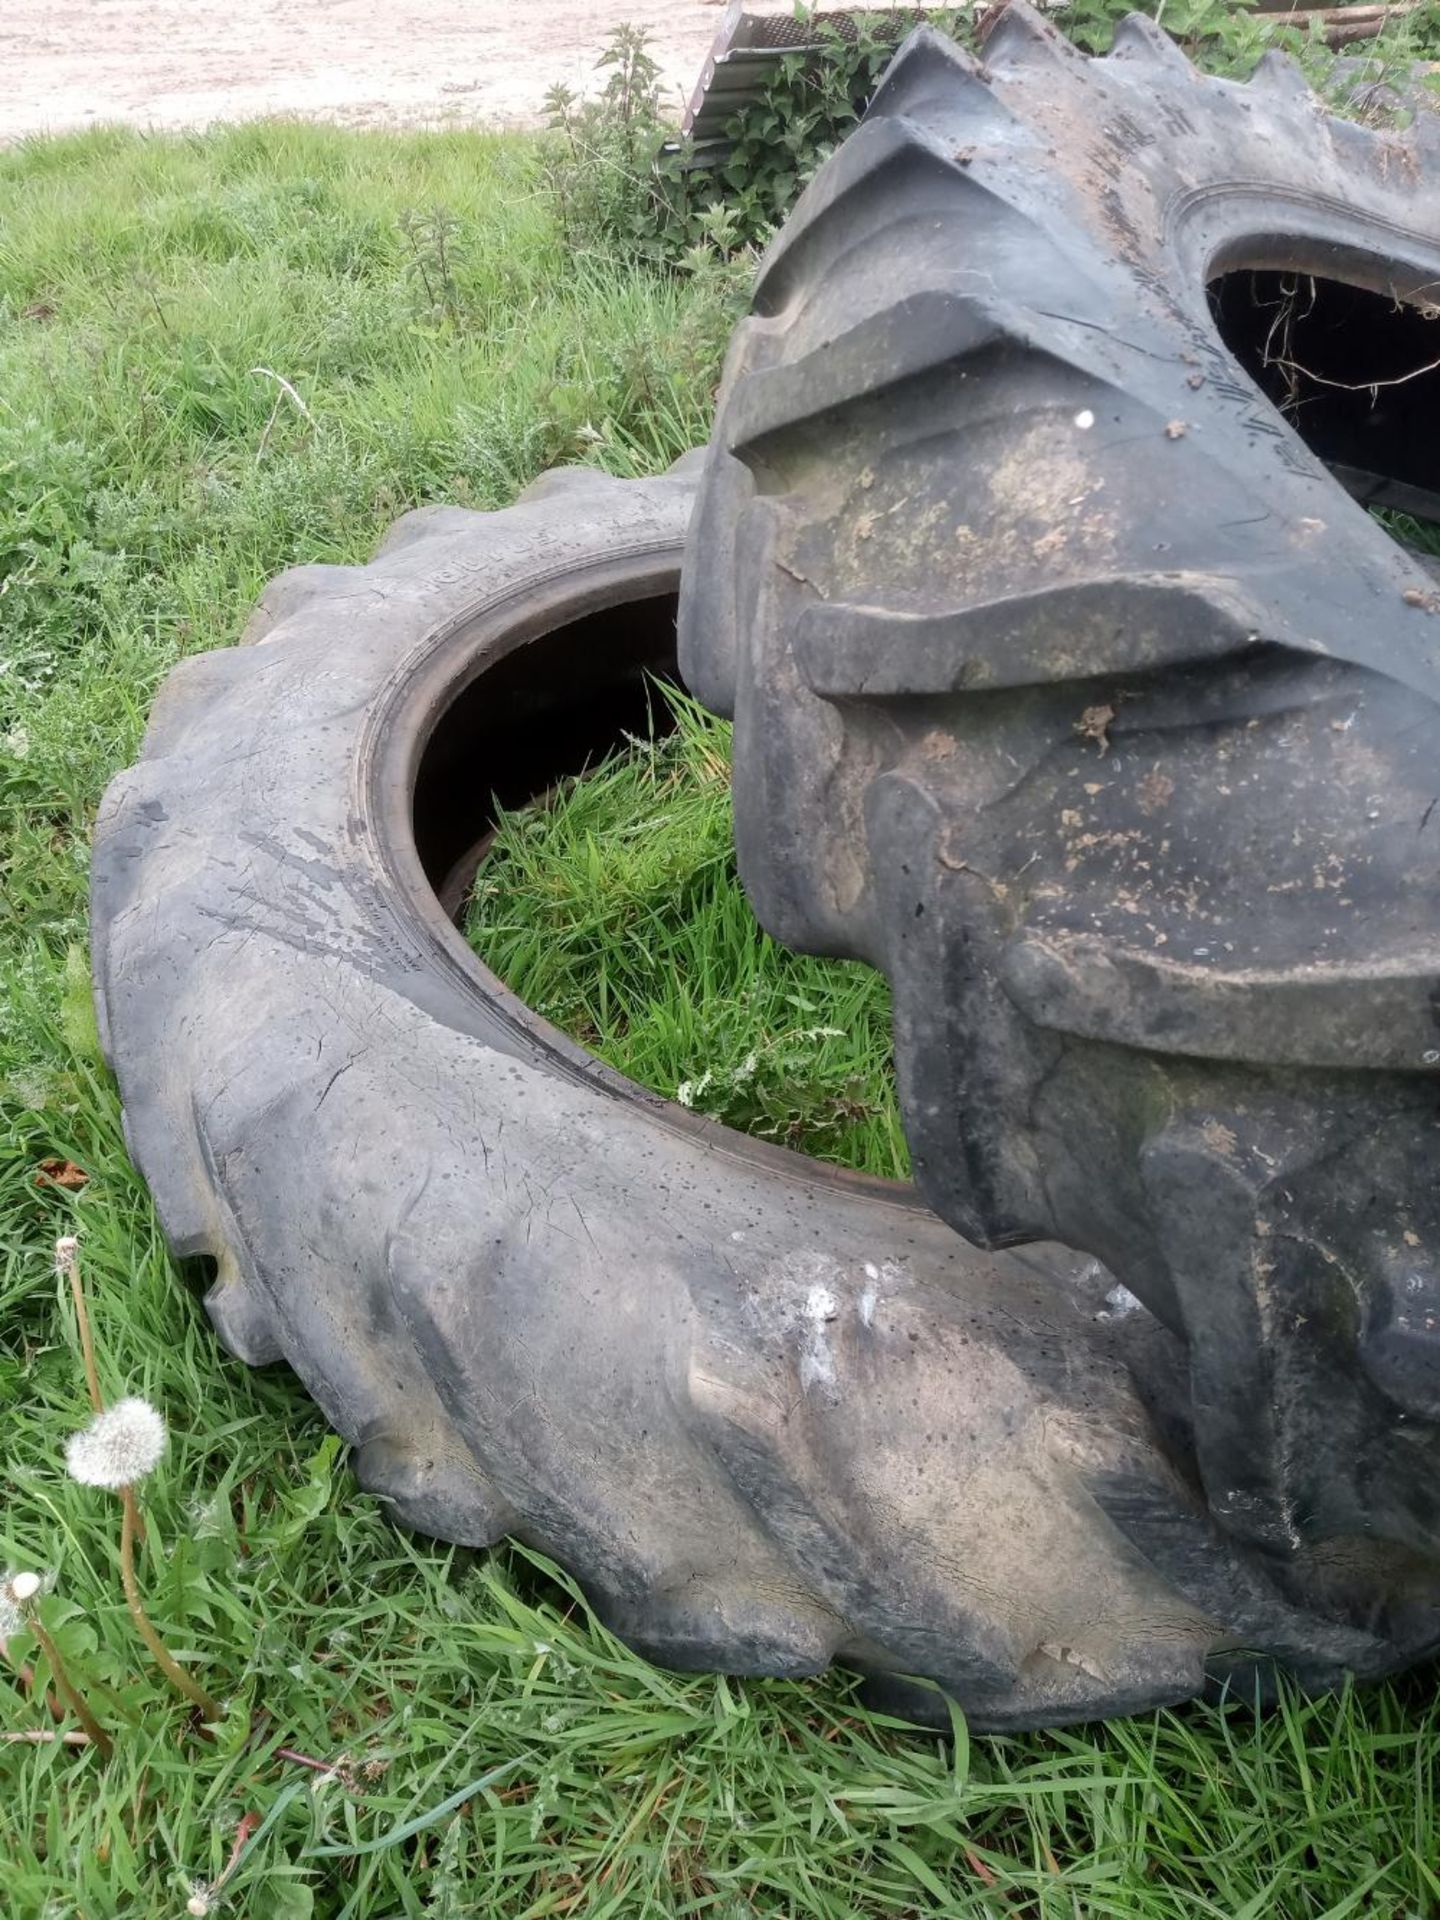 Tractor tyres. Stored near Norwich, Norfolk.